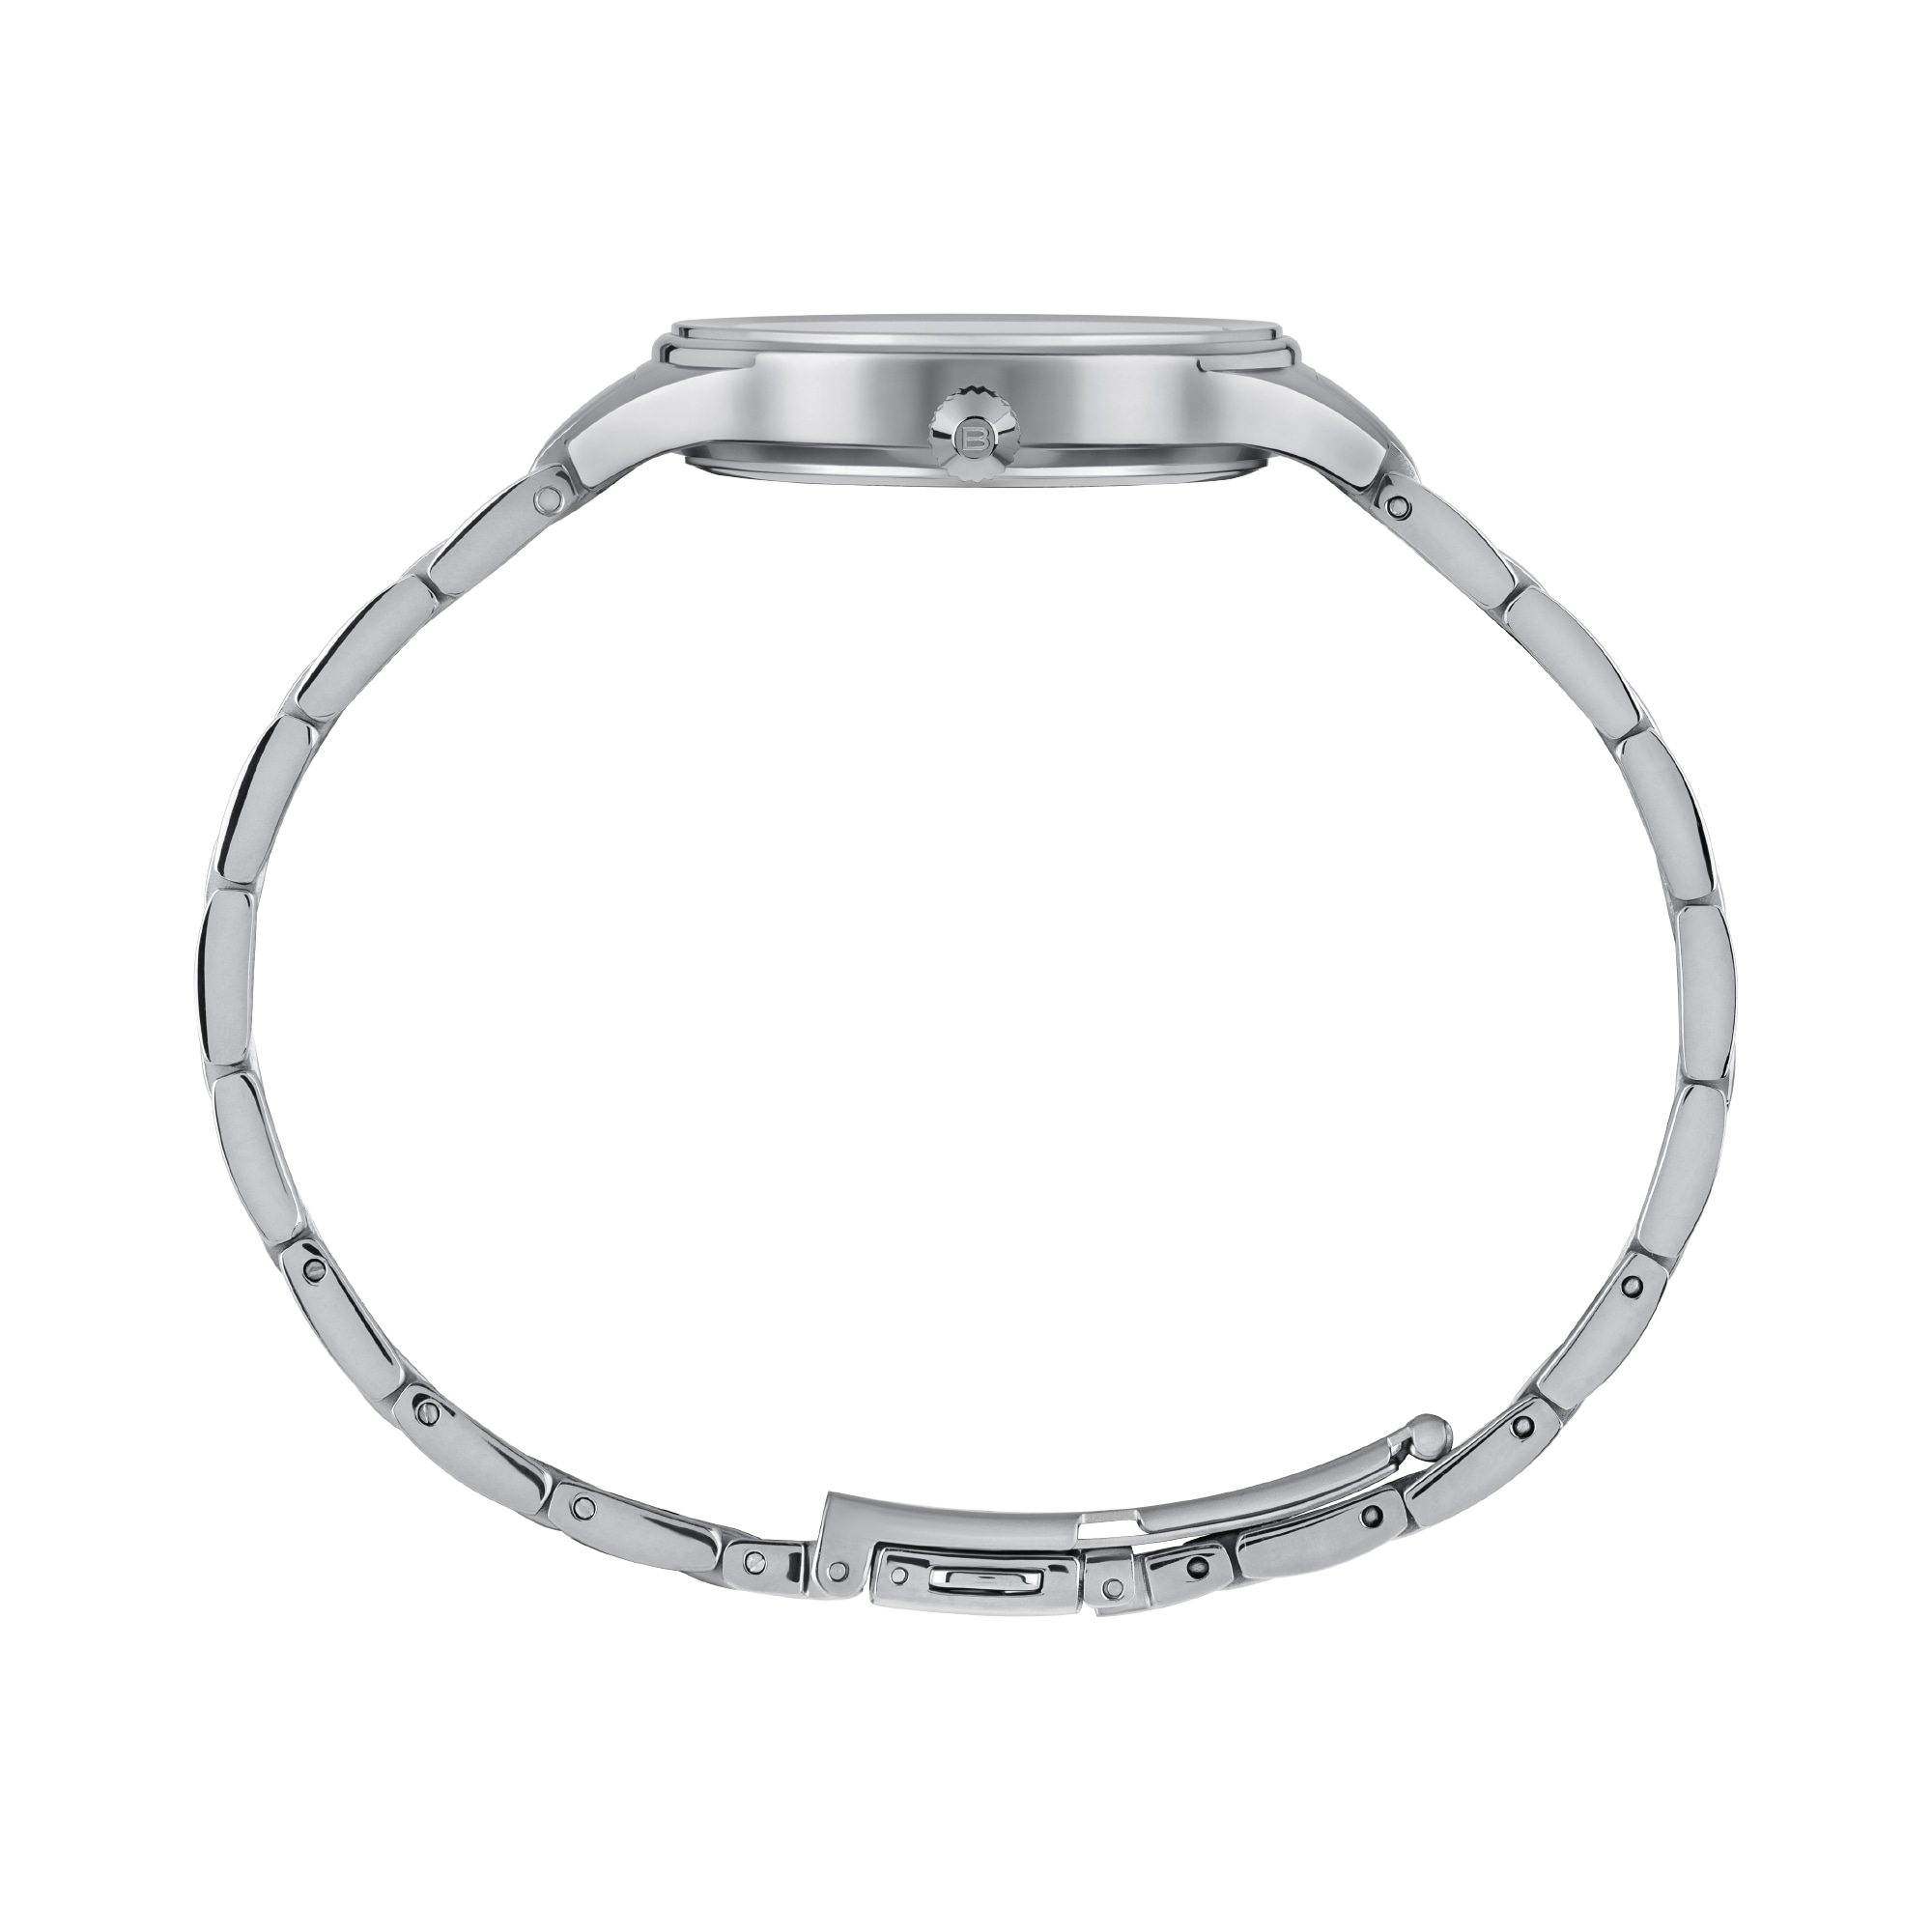 SHEER - SOLO TEMPO LADY 32 MM - 2 - TW1996 | Breil